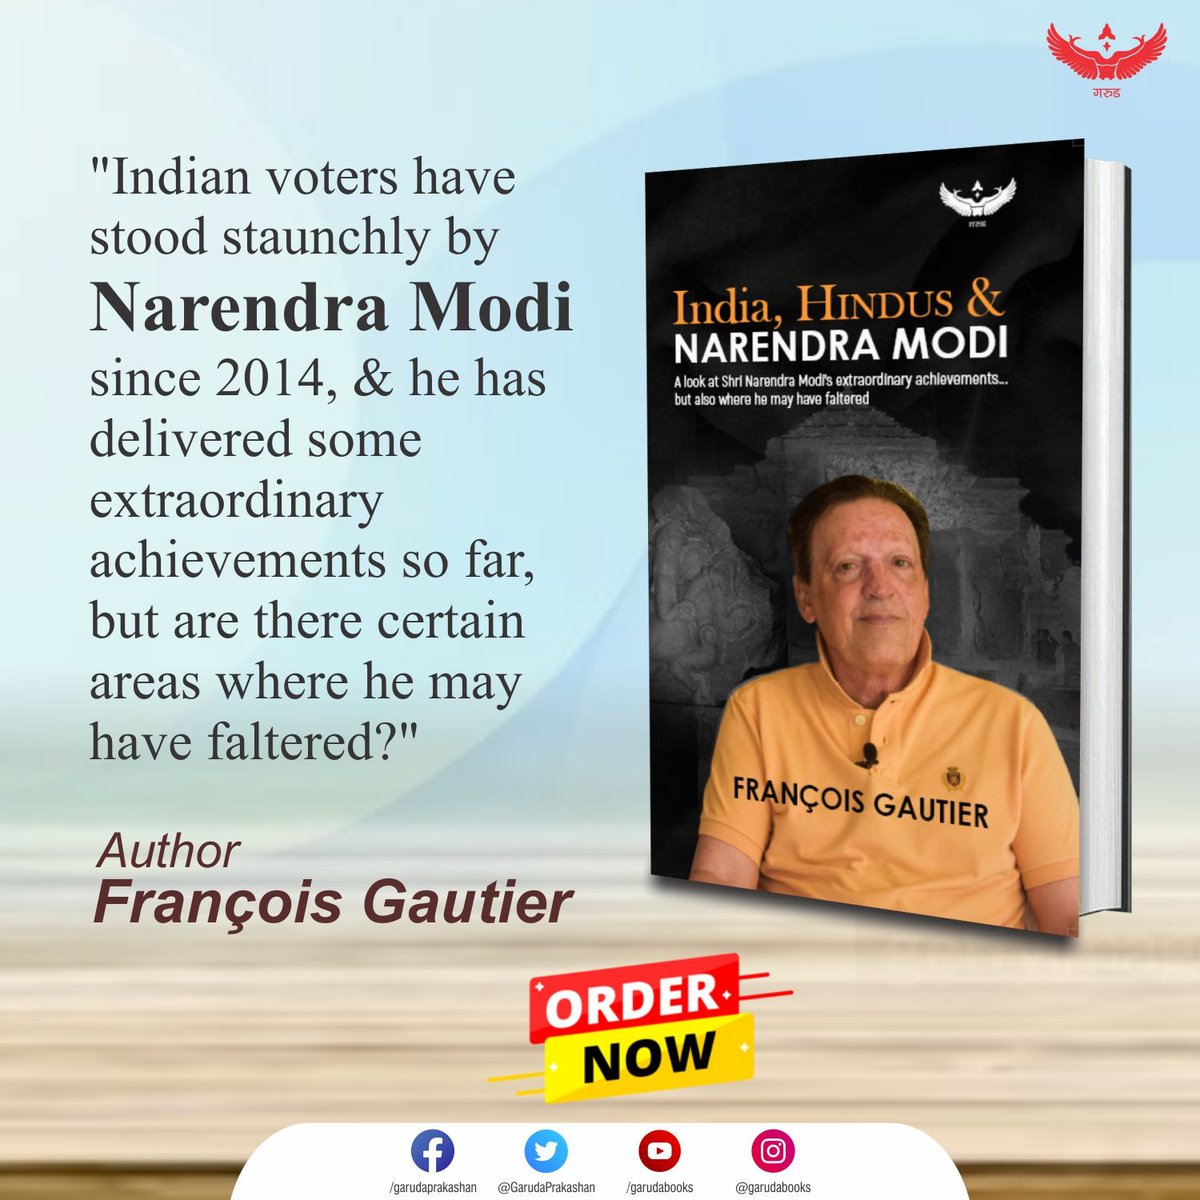 This stunning new book authored by François Gautier critically examines Prime Minister @narendramodi's tenure, assessing his successes and failures as he approaches his third term.✅ While praising the Prime Minister's anti-corruption stance, hard work, and focus on India's